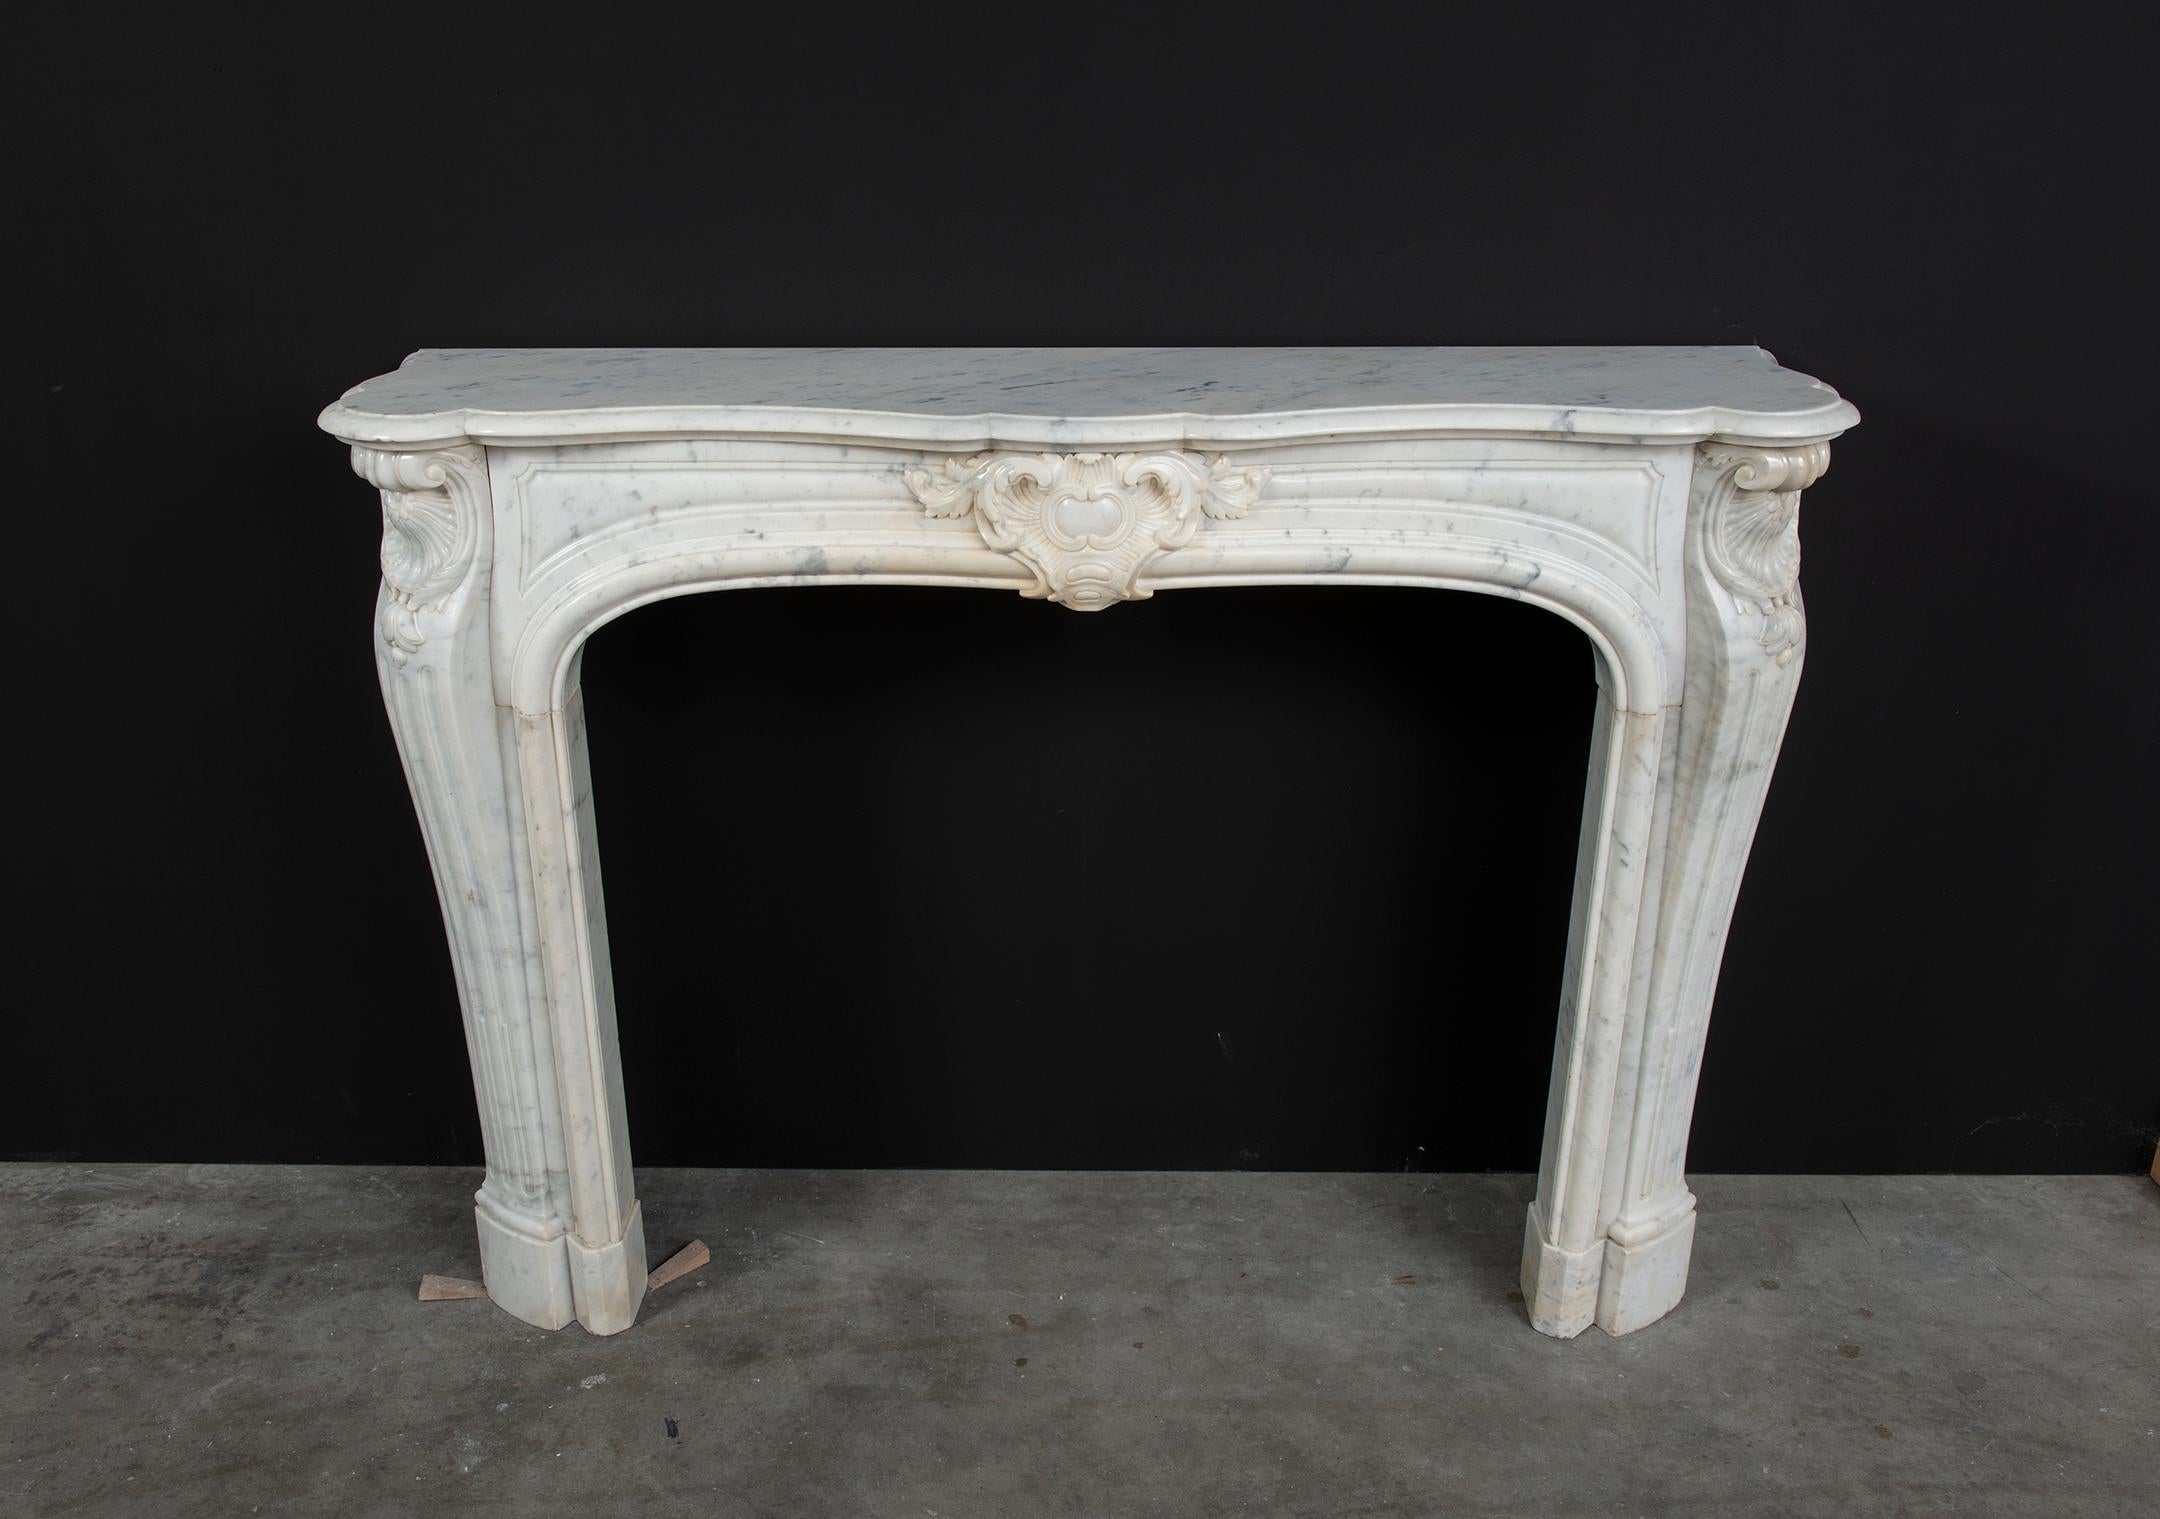 Hand-Carved Beautiful French Louis XV Fireplace in White Marble, Paris- France